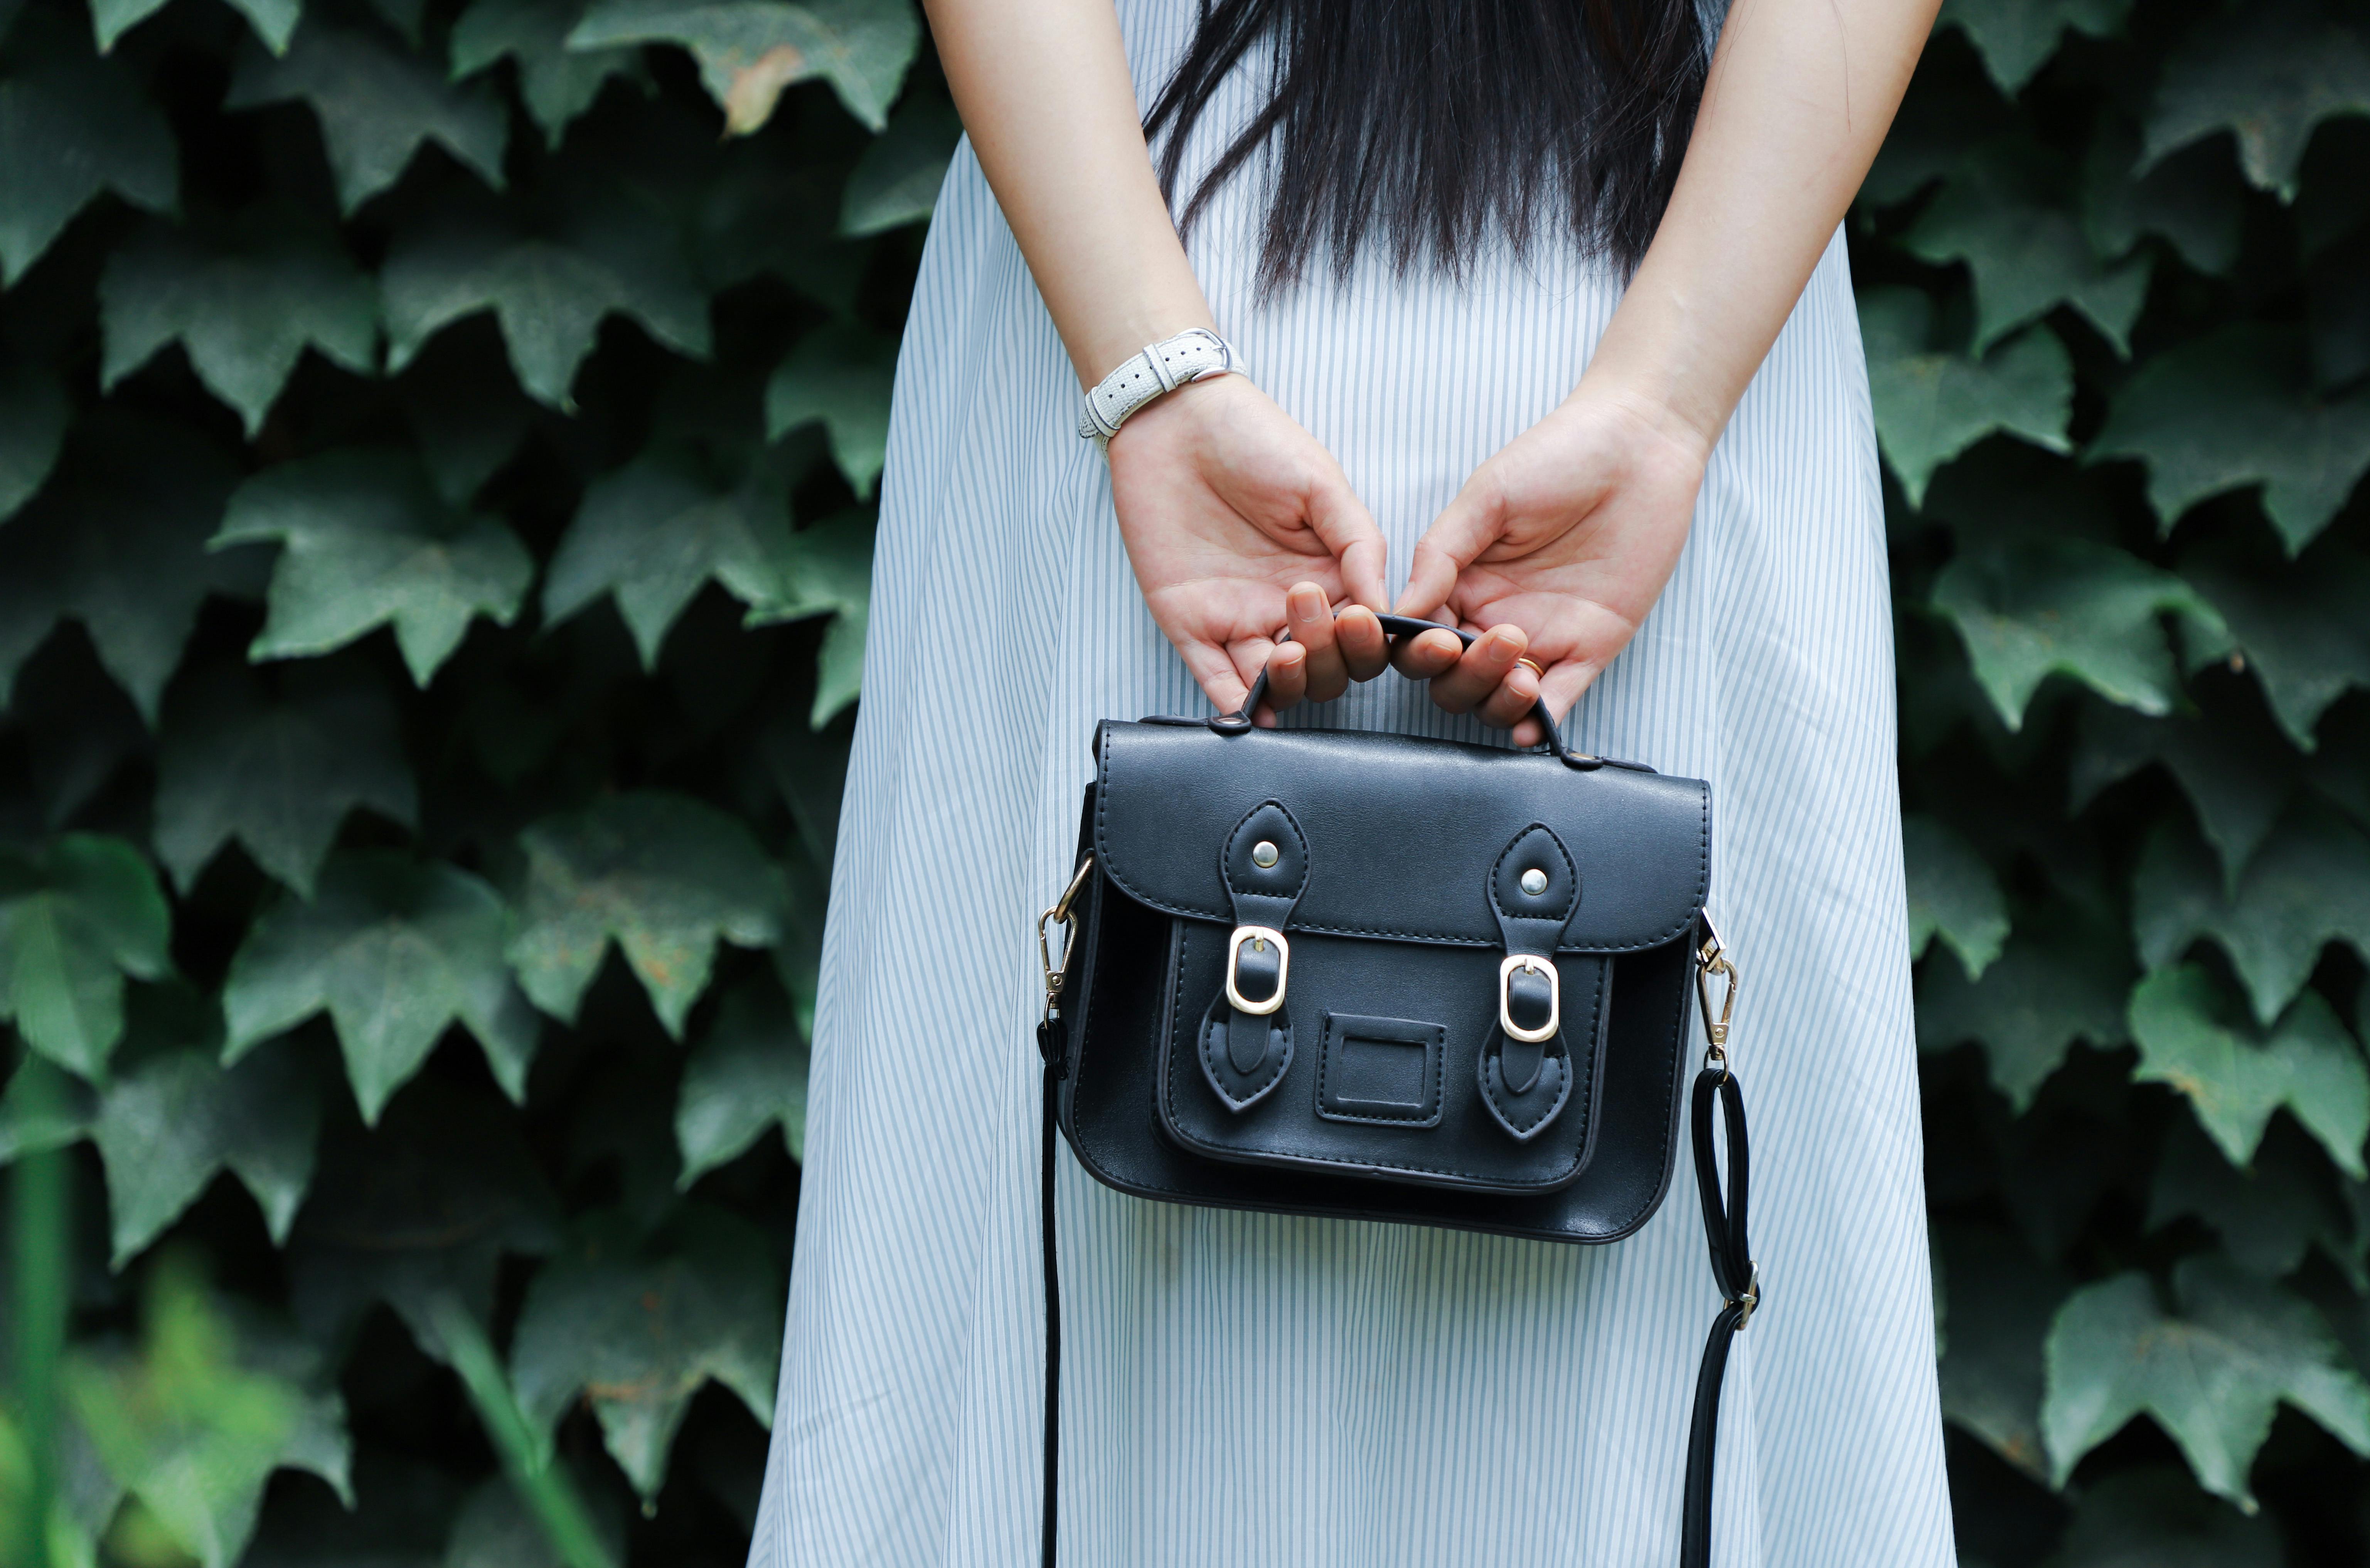 A woman holding a leather bag | Source: Pexels